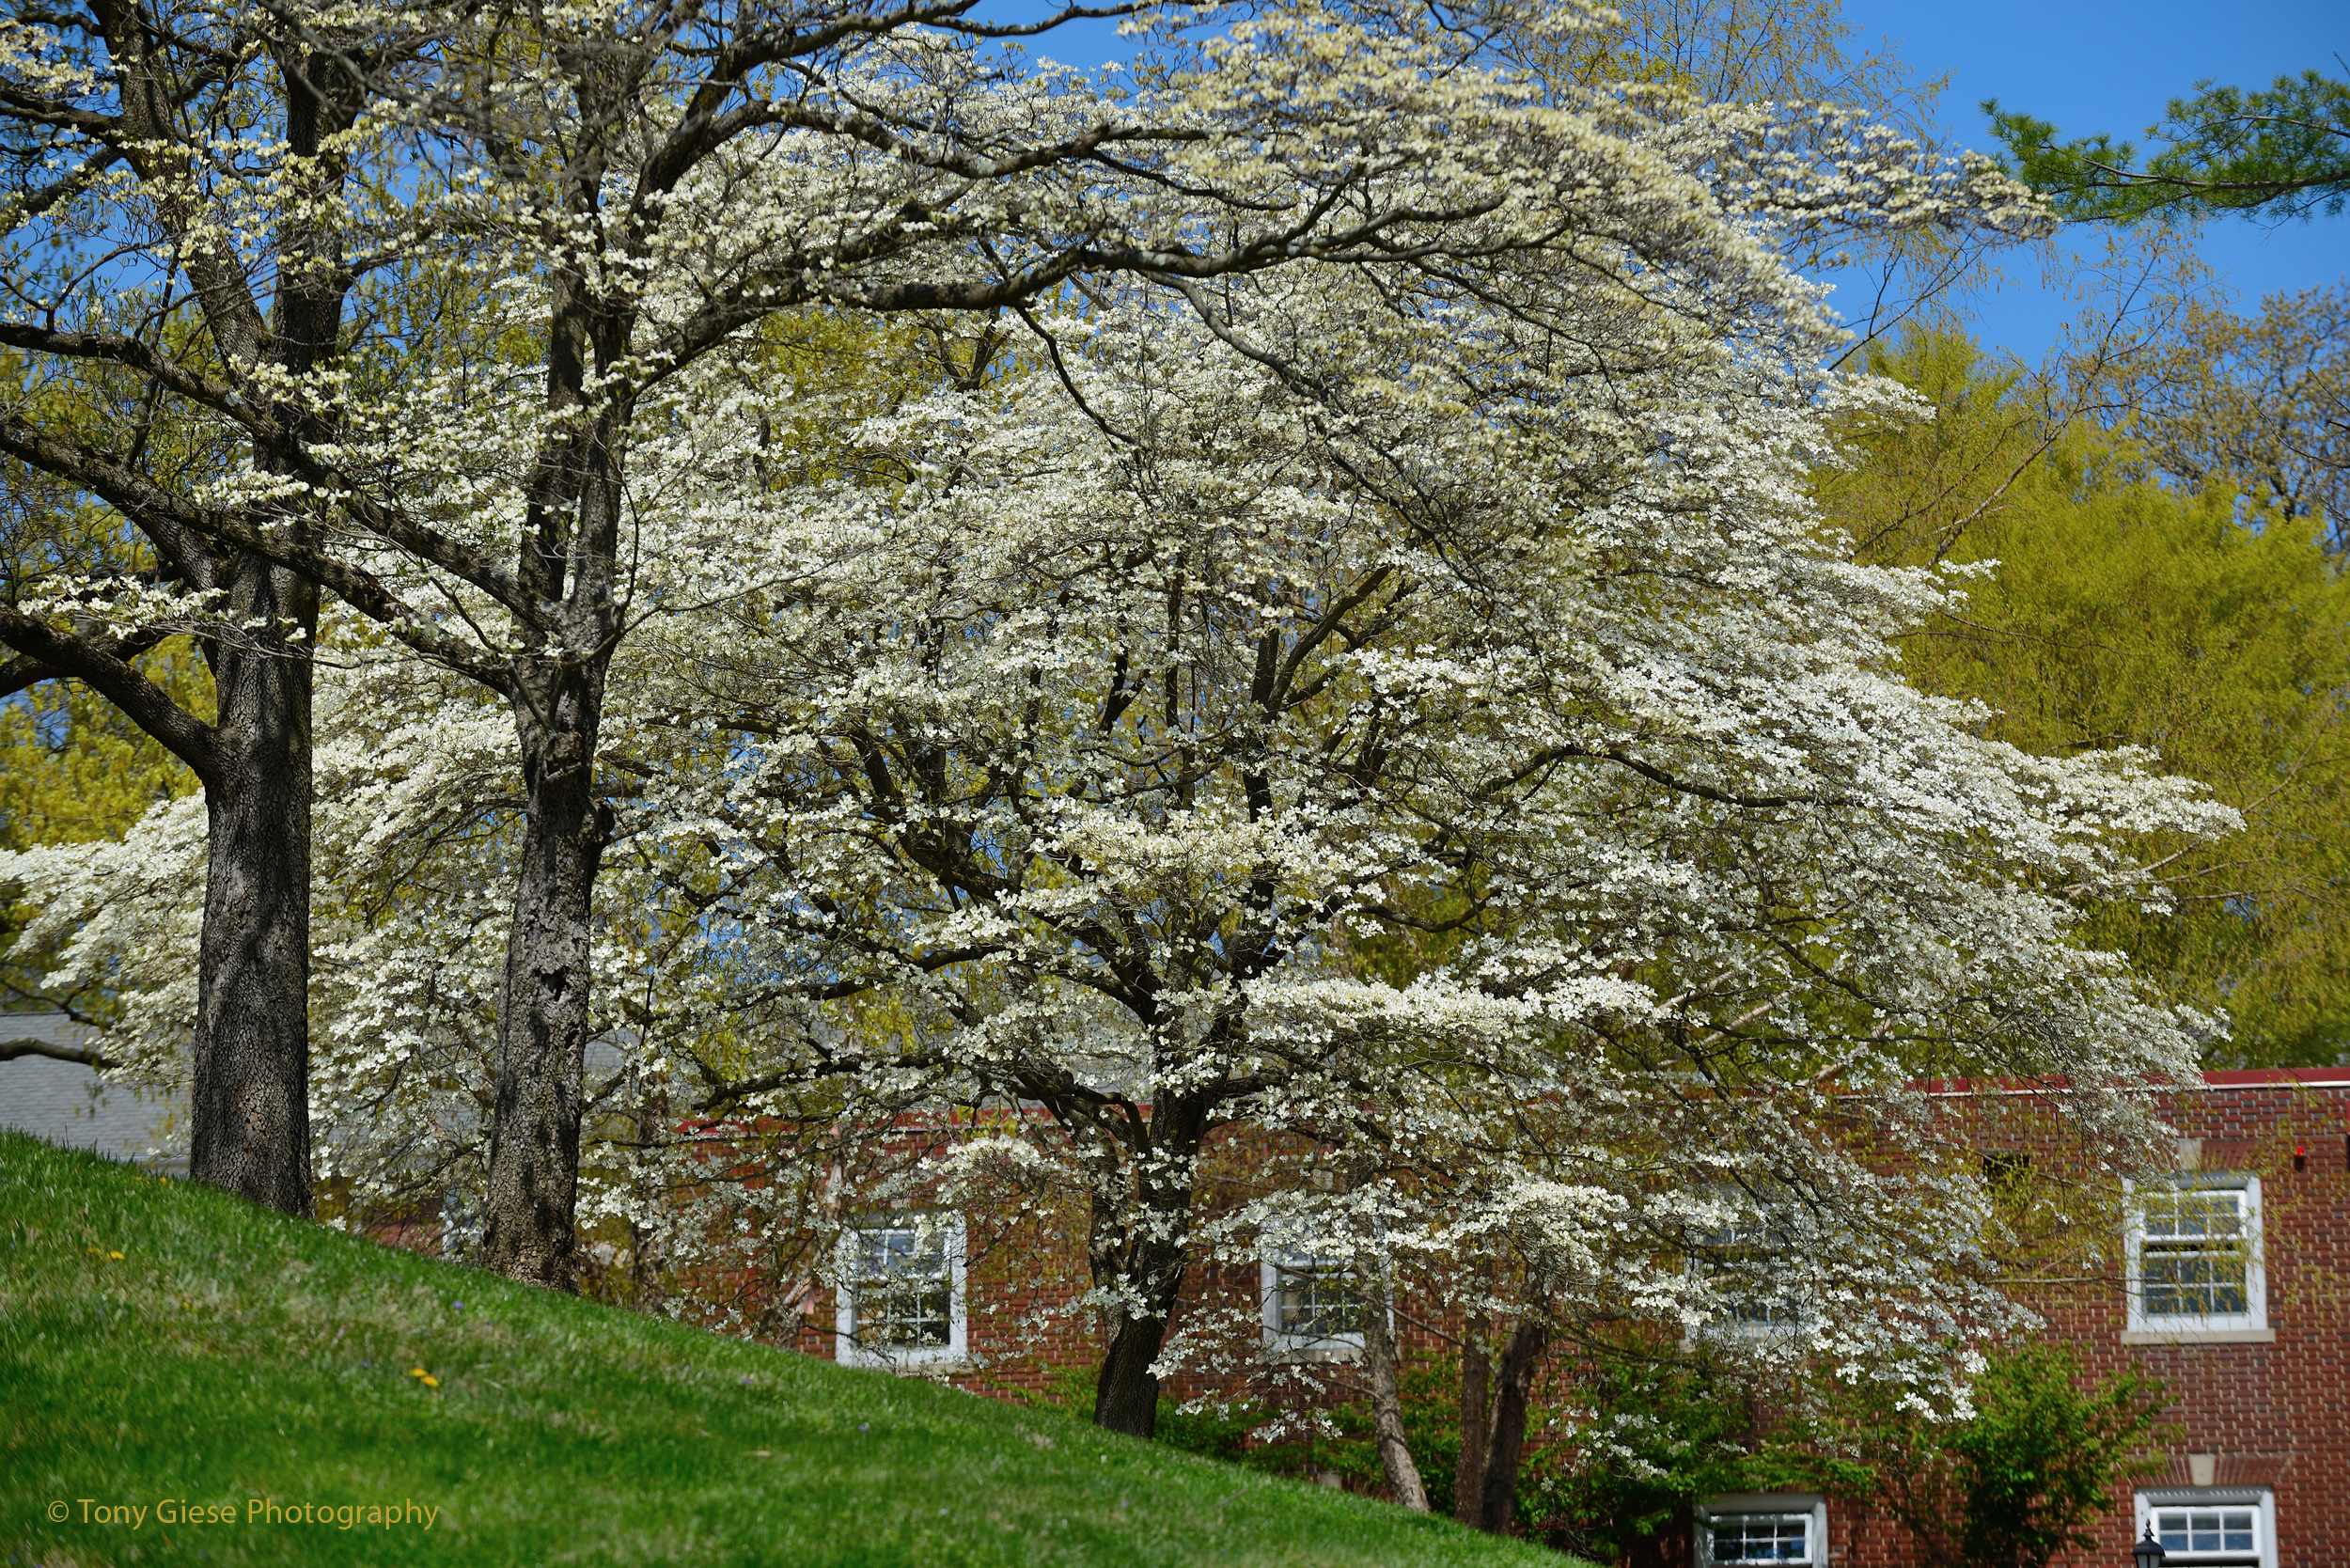 Valley Forge Dogwood Trees are in blosson adding beauty and interest to any landscape.